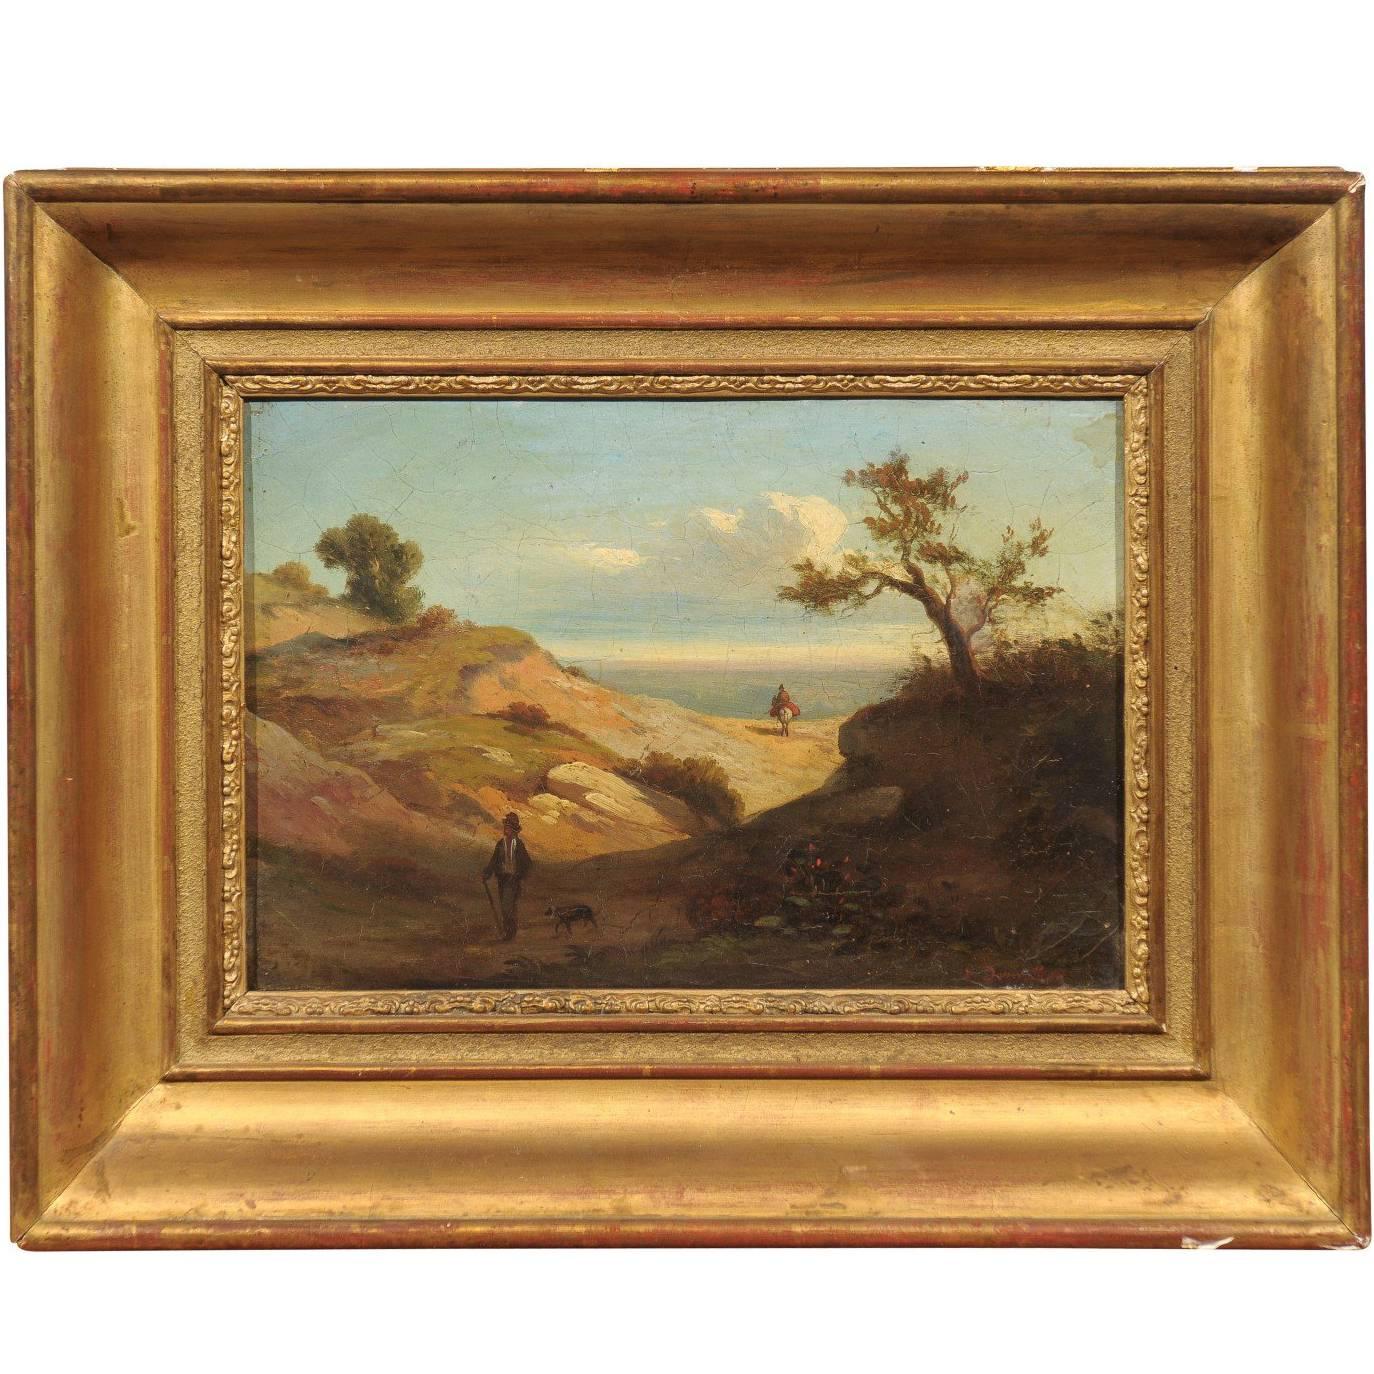 19th Century Italian Oil on Canvas Landscape Painting in Giltwood Frame